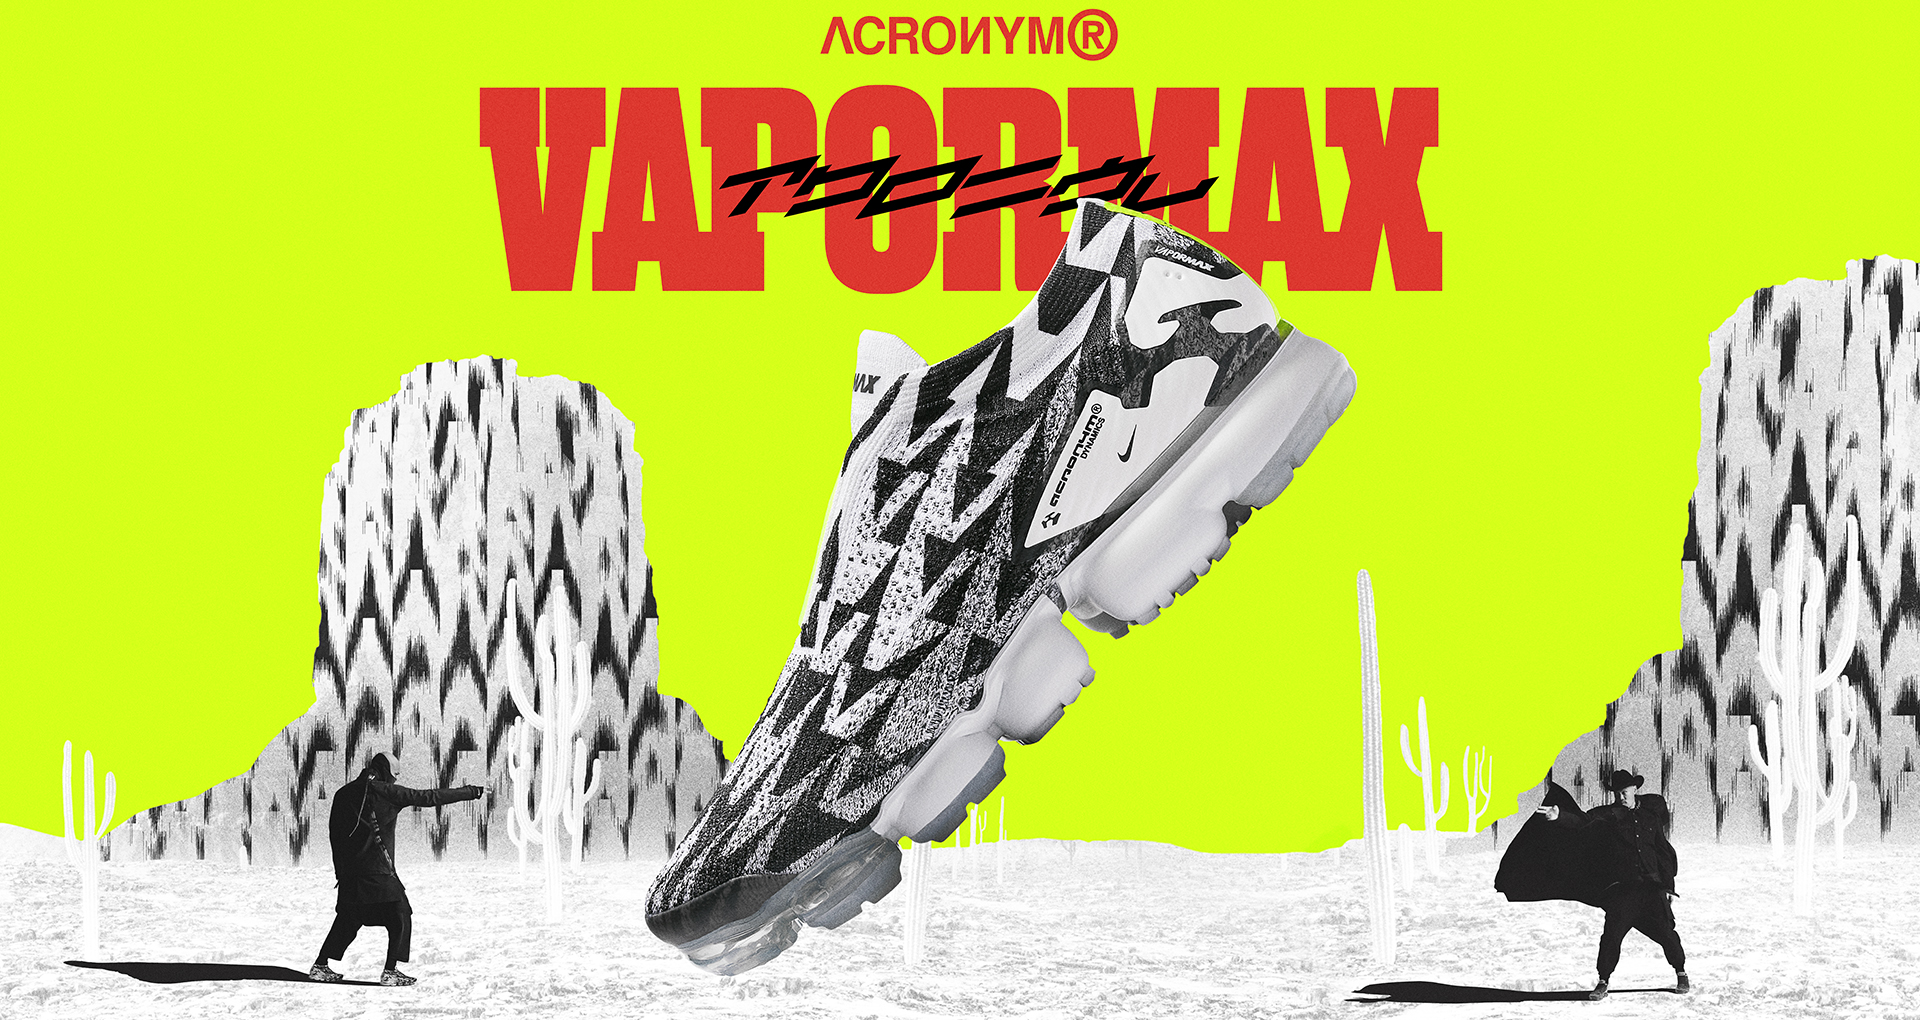 Nike Unveils ACRONYM Air VaporMax Moc 2 Collabs with Old West Trailer